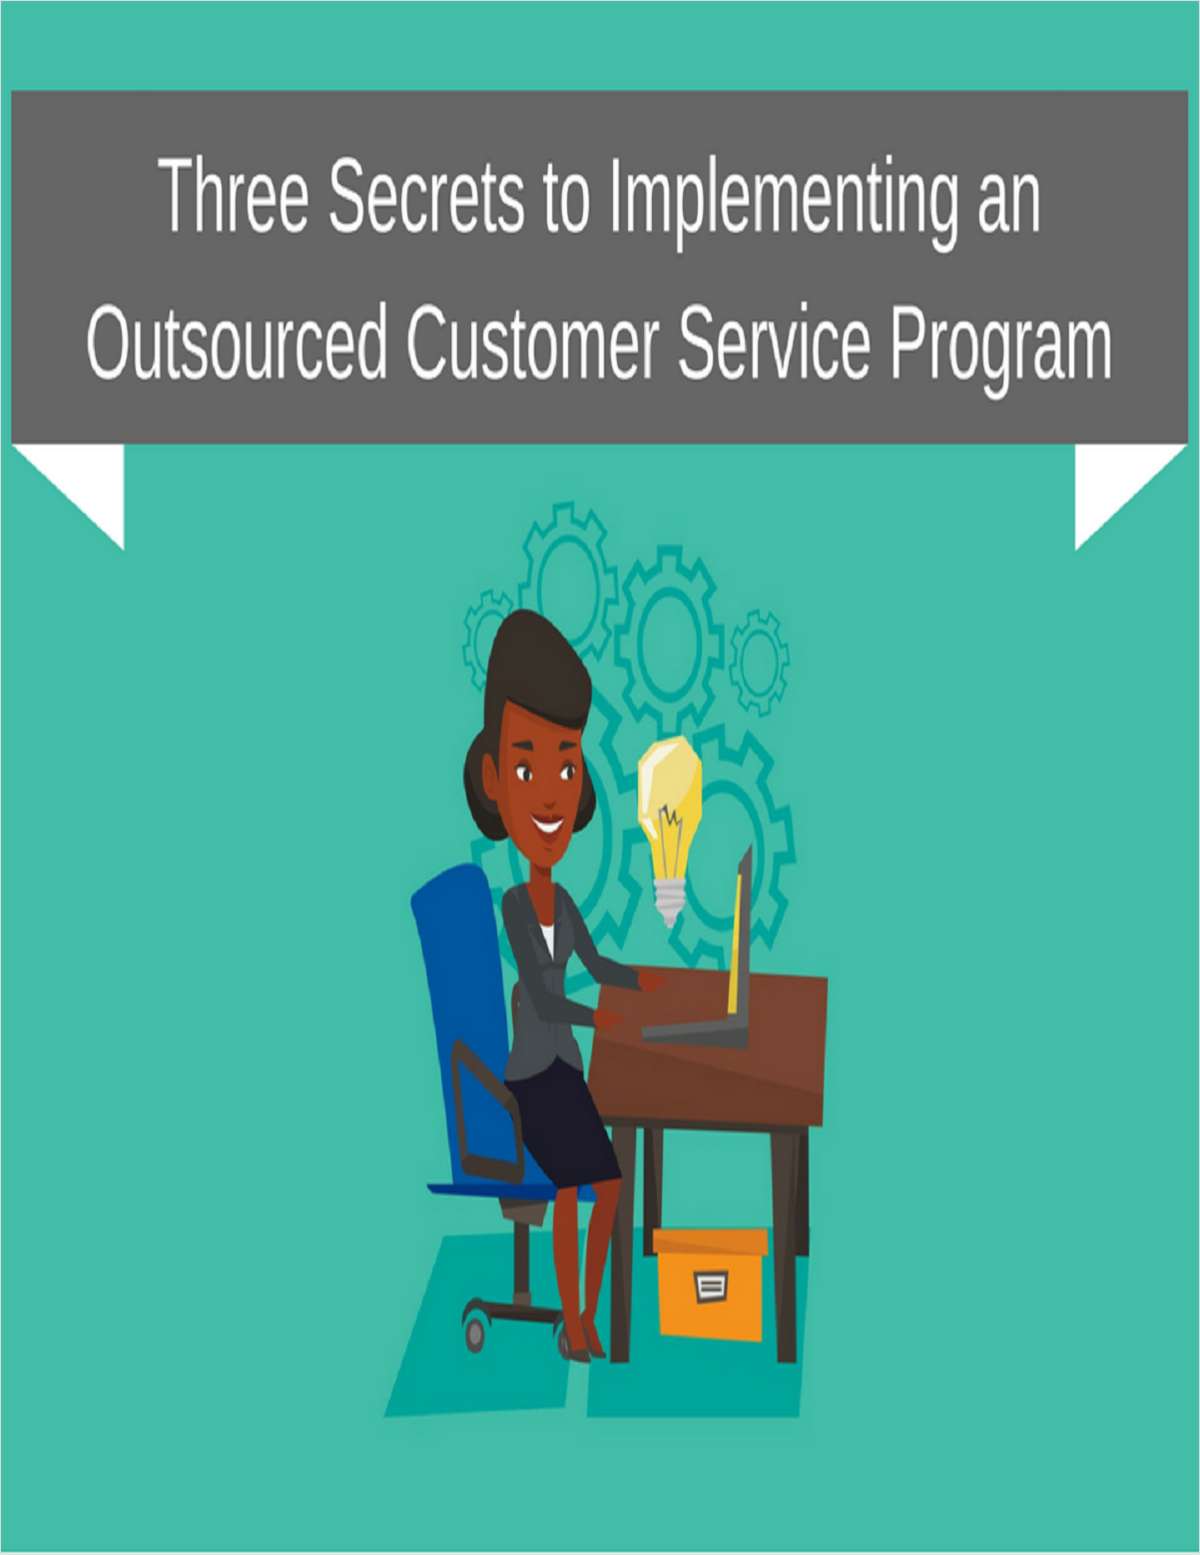 Three Secrets to Implementing an Outsourced Customer Service Program